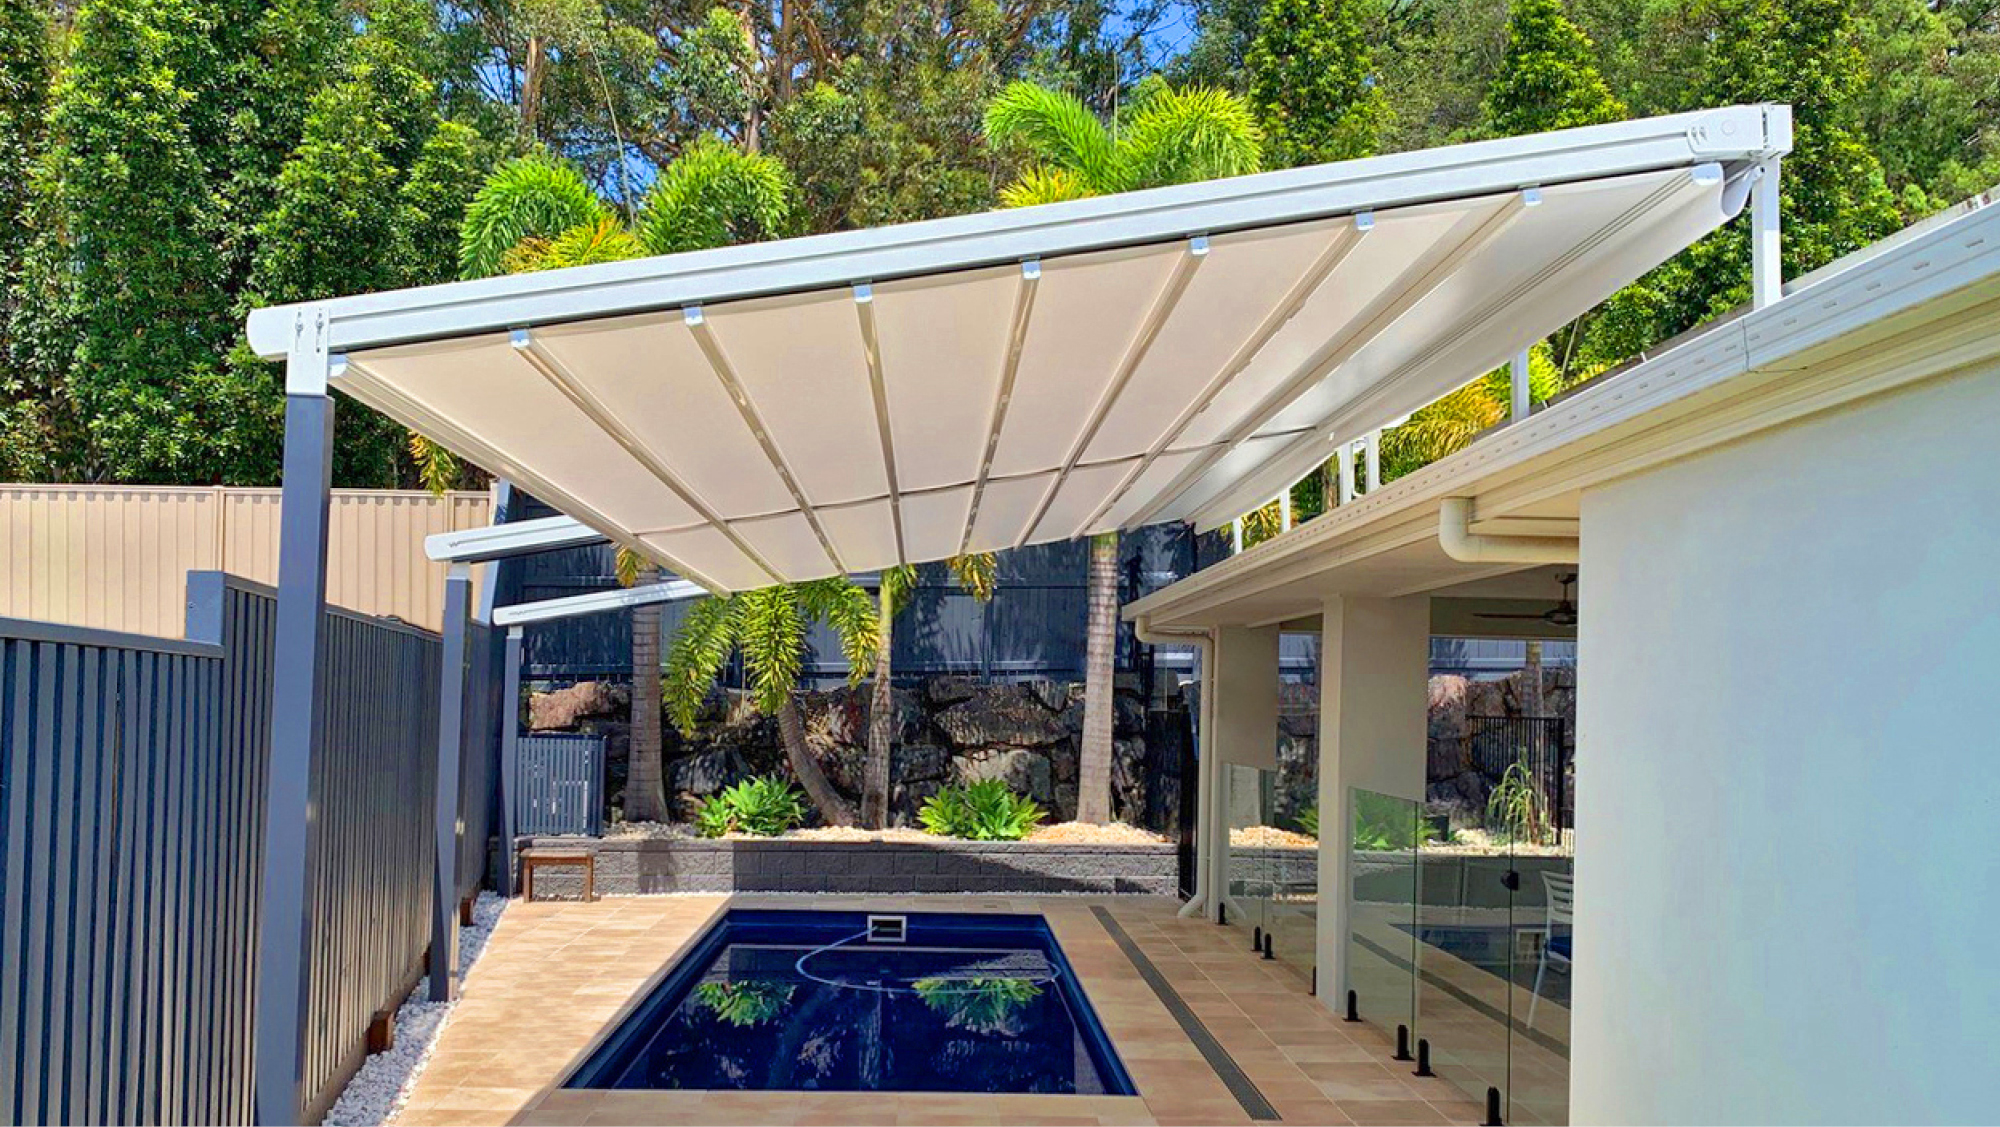 SWAS Flat Retractable Roof System